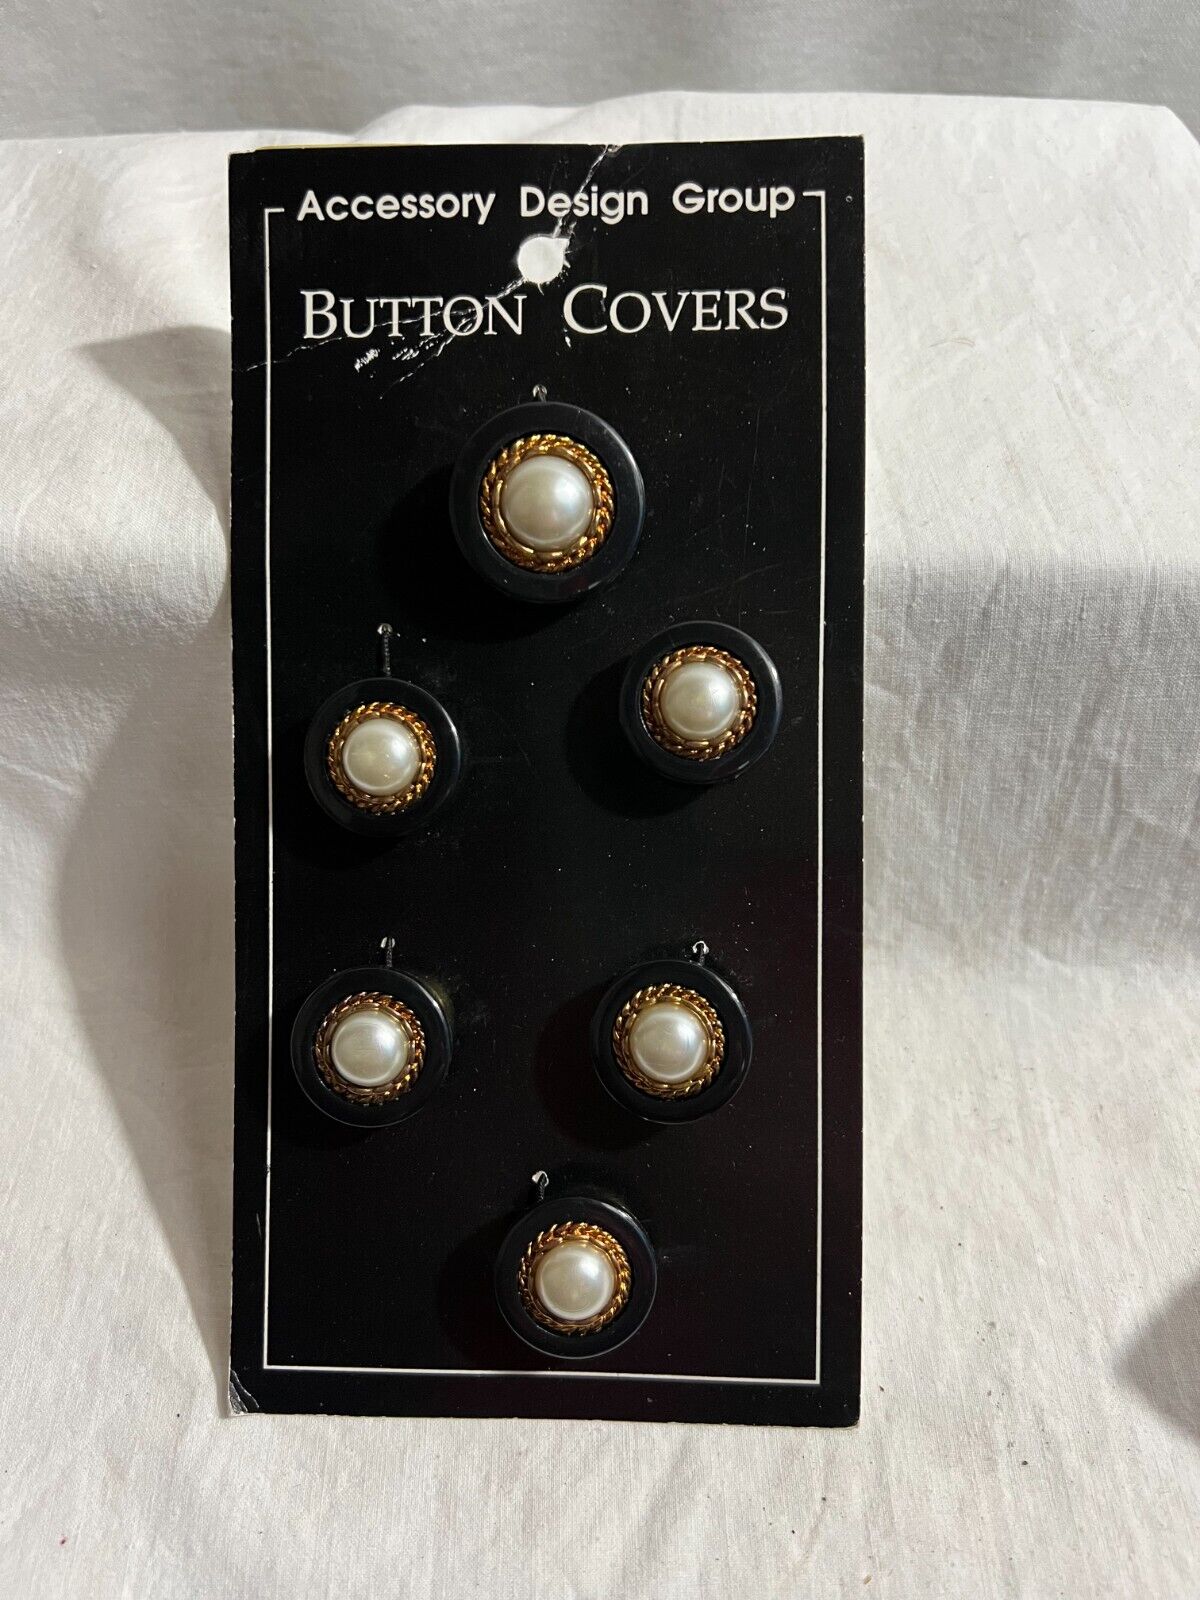 VGT 80s New Old Stock Set/6 Buttons Covers Snaps Black Faux Pearls Copper Trim